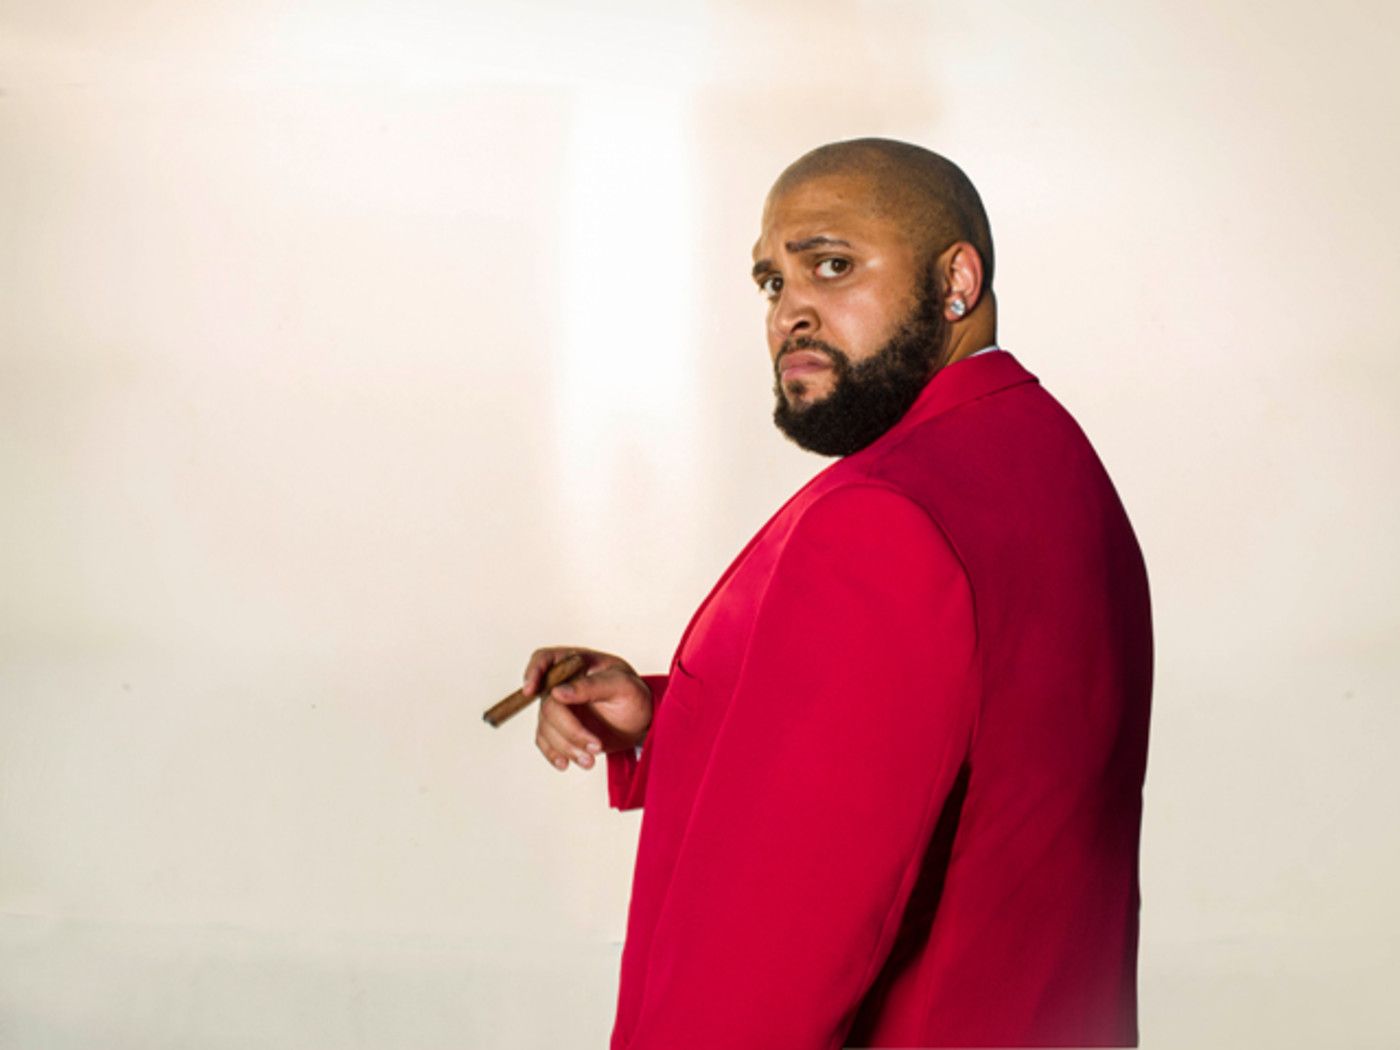 Actor Who Played Suge Knight in 'Straight Outta Compton' Faces IRL Assault Charges